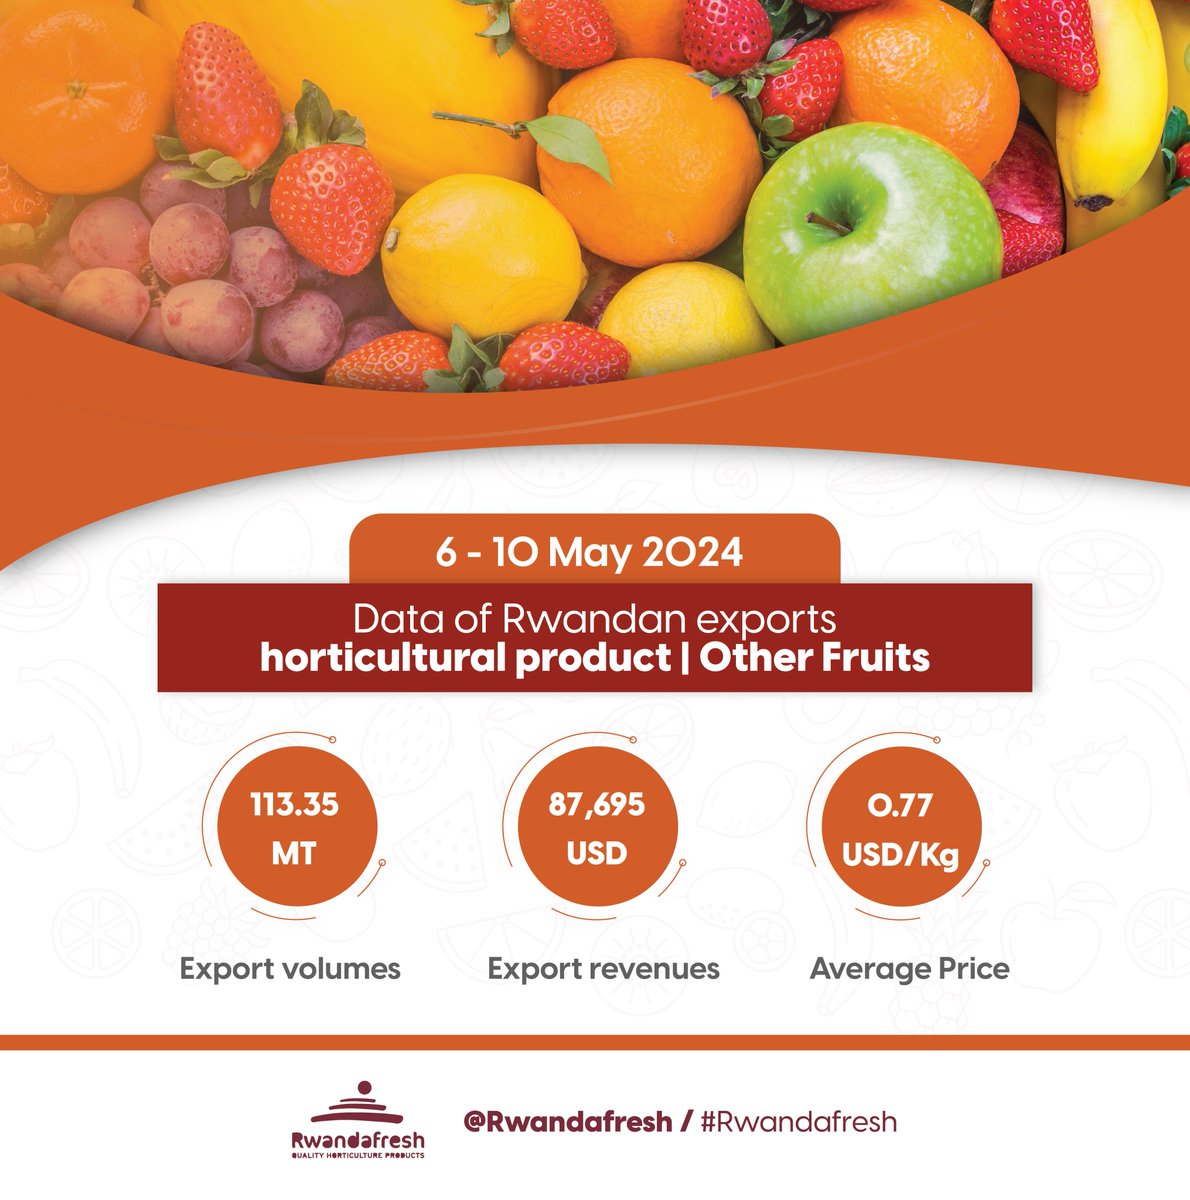 Rwanda's horticulture sector is thriving!

During last week (06-10 May 2024);
➡️Earnings from various fruits, including avocadoes passion fruits, and other fruits totaled 137.96 metric tons, yielding 145,841 USD.
...